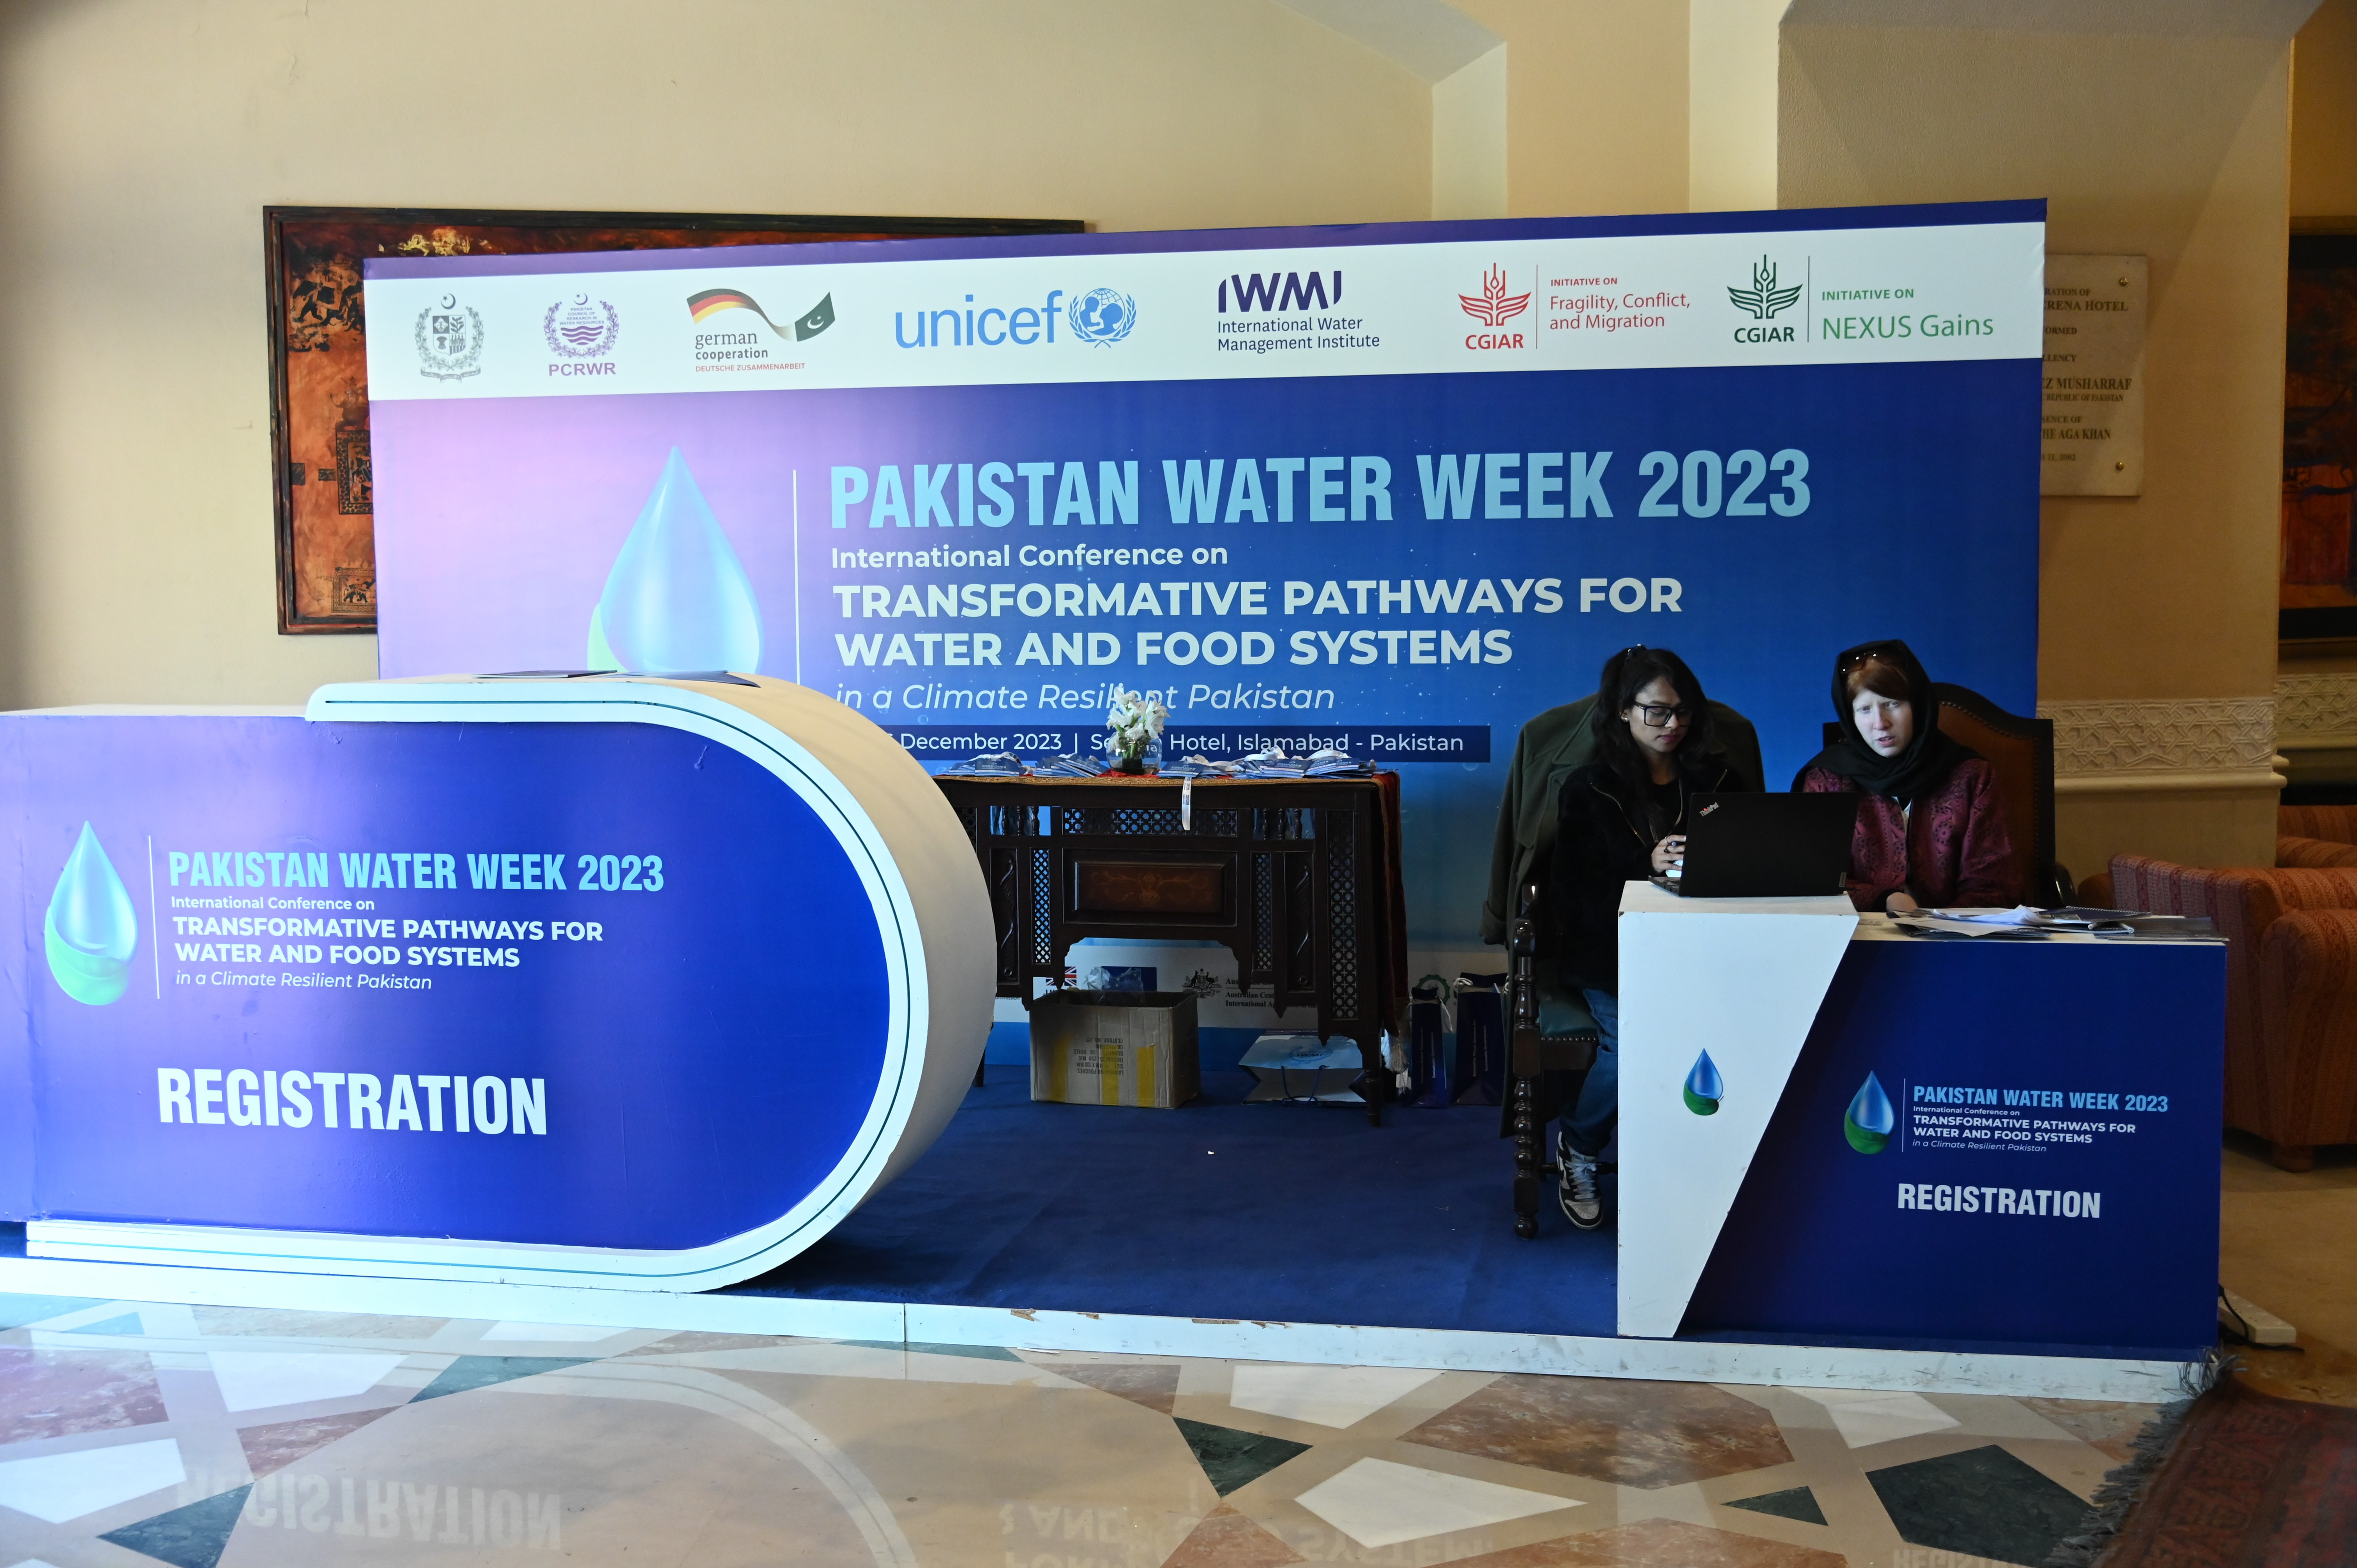 the registration counter for  an International Conference & National Workshop on "PAKISTAN WATER WEEK 2023:TRANSFORMATIVE PATHWAYS FOR WATER AND FOOD SYSTEM"